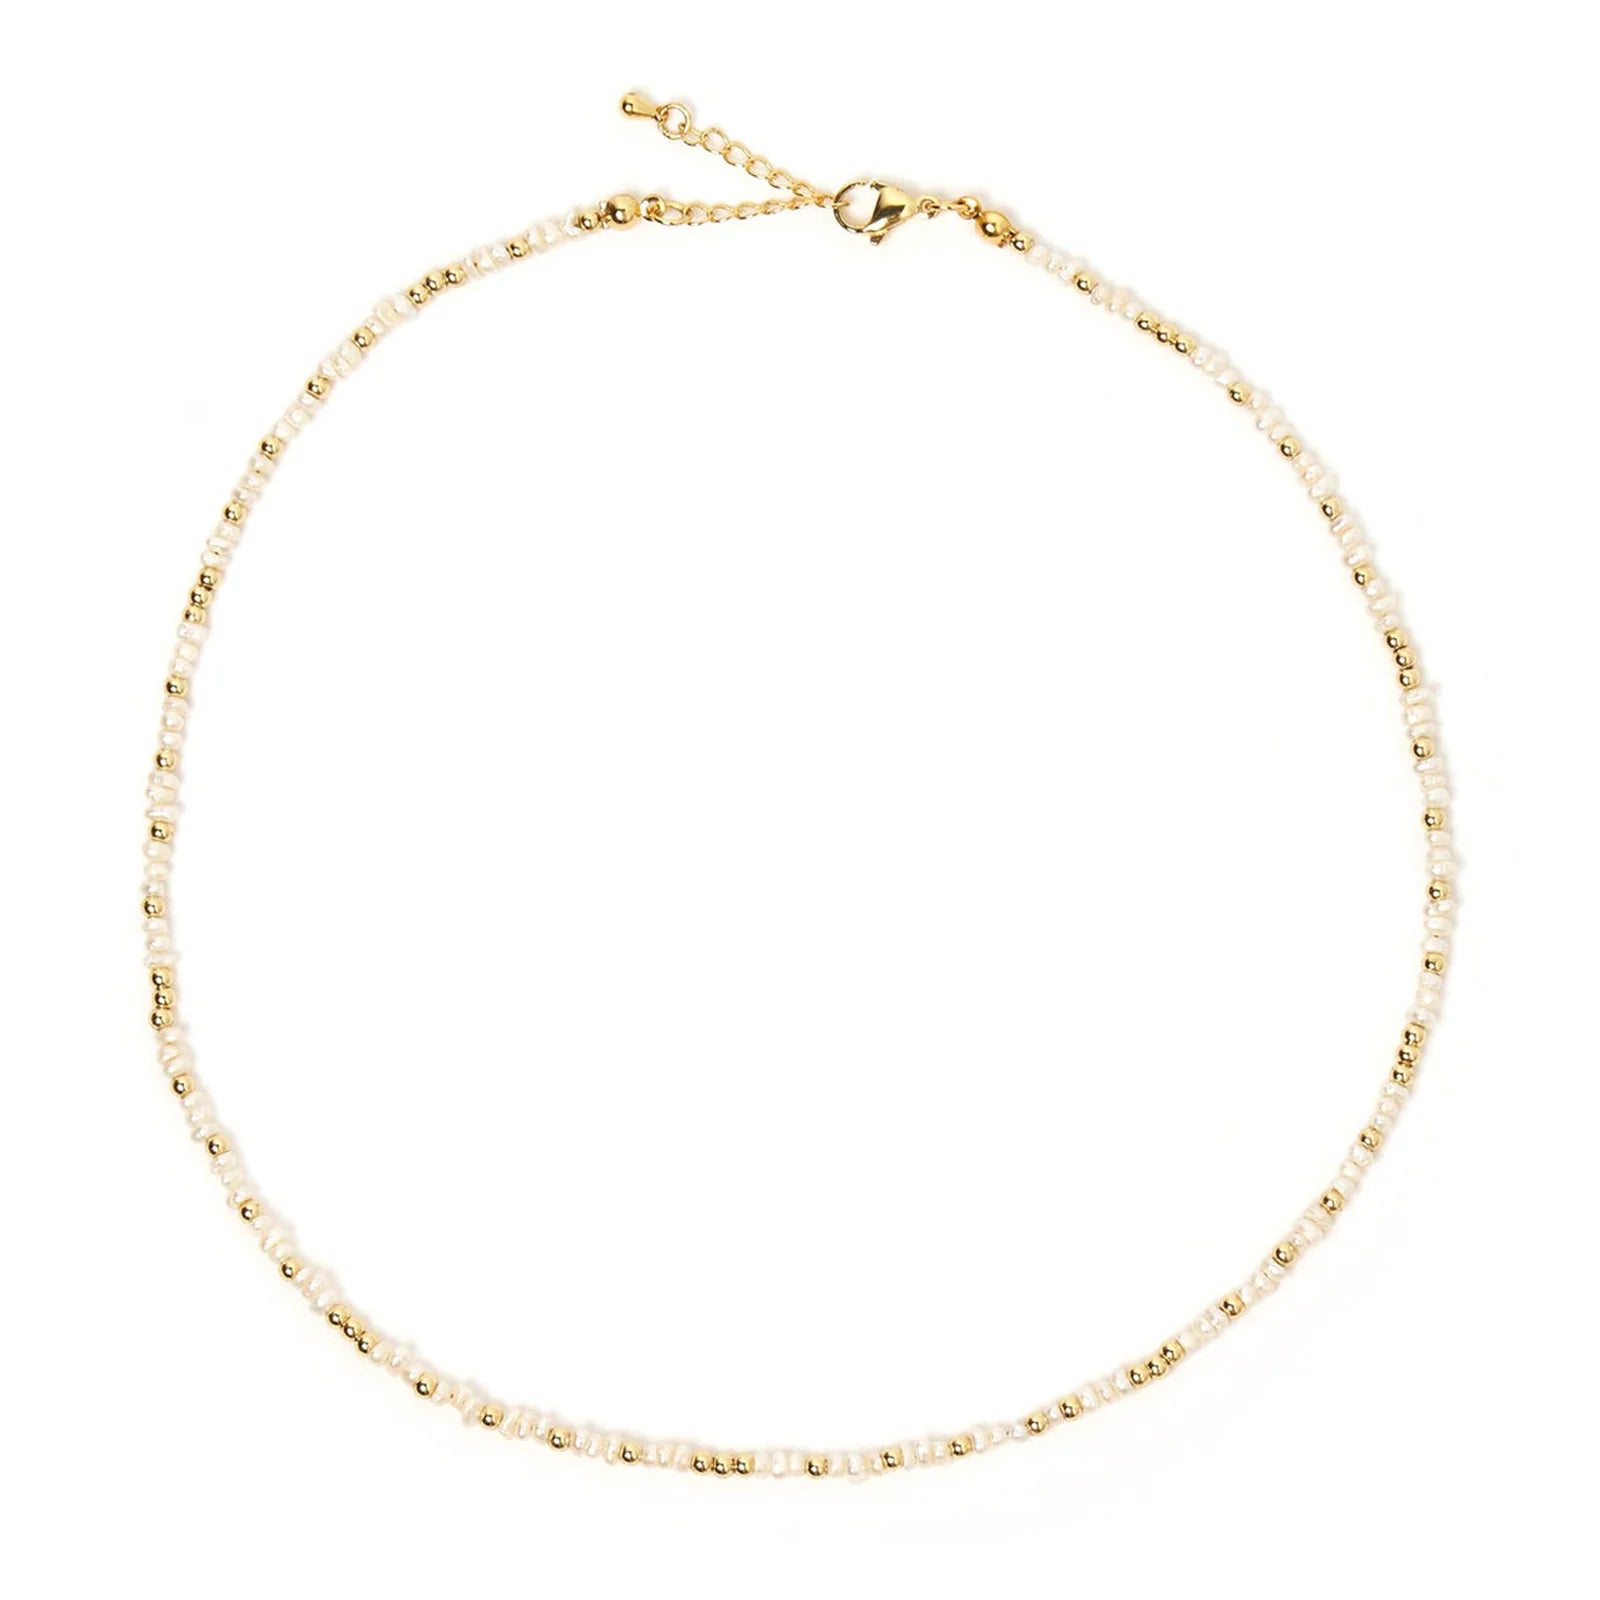 Lucia Pearl and Gold Necklace by Arms of Eve